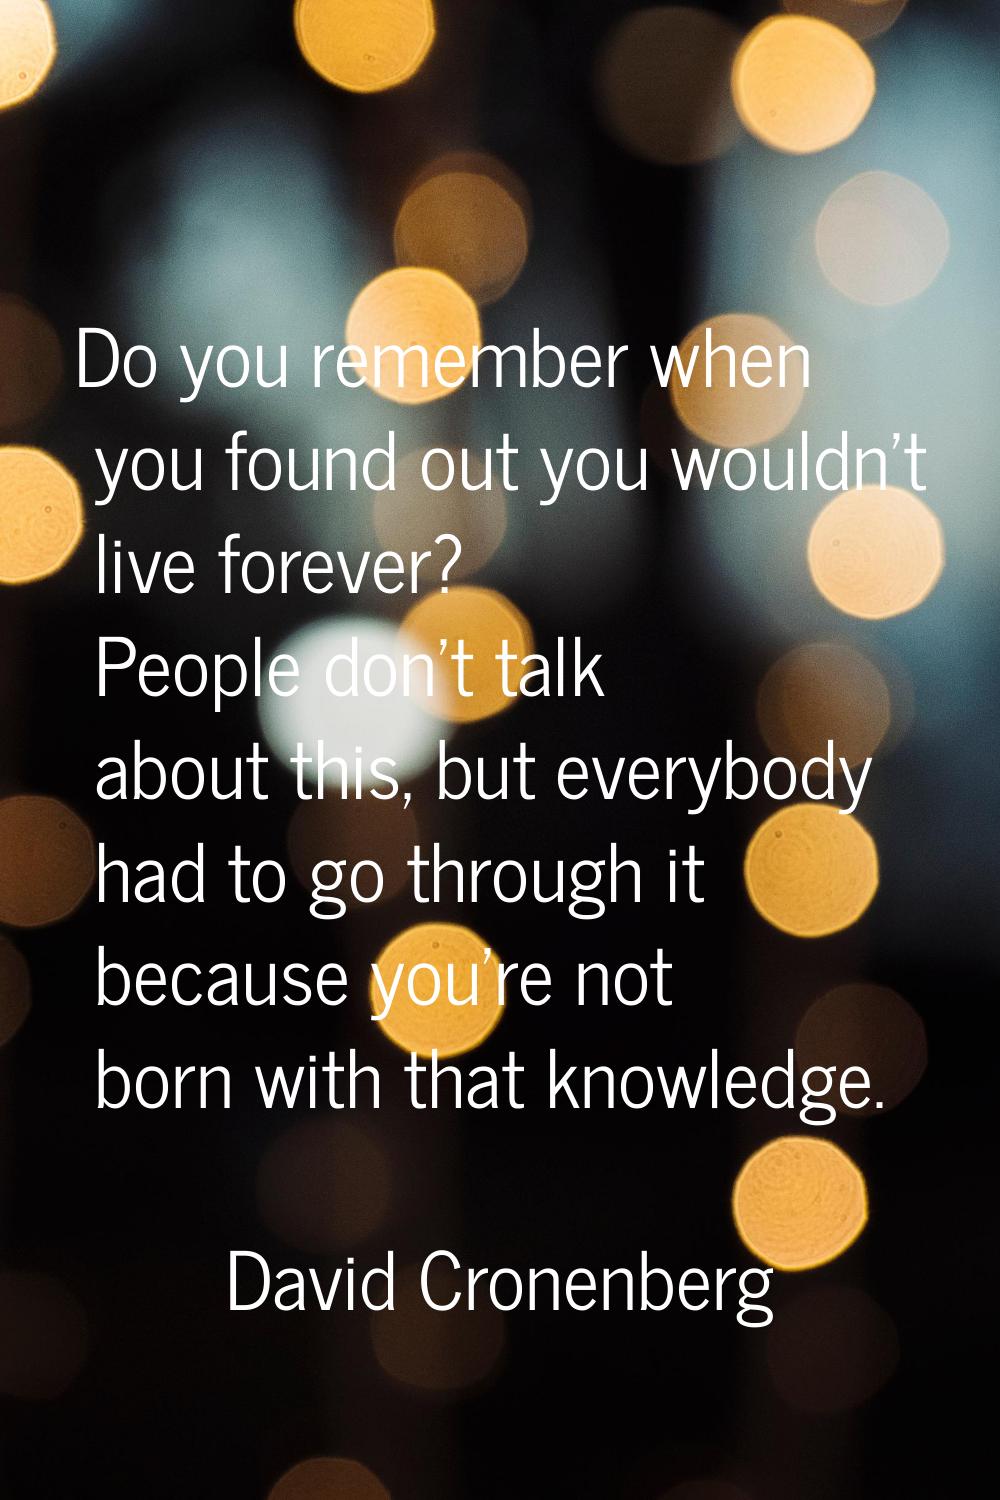 Do you remember when you found out you wouldn't live forever? People don't talk about this, but eve